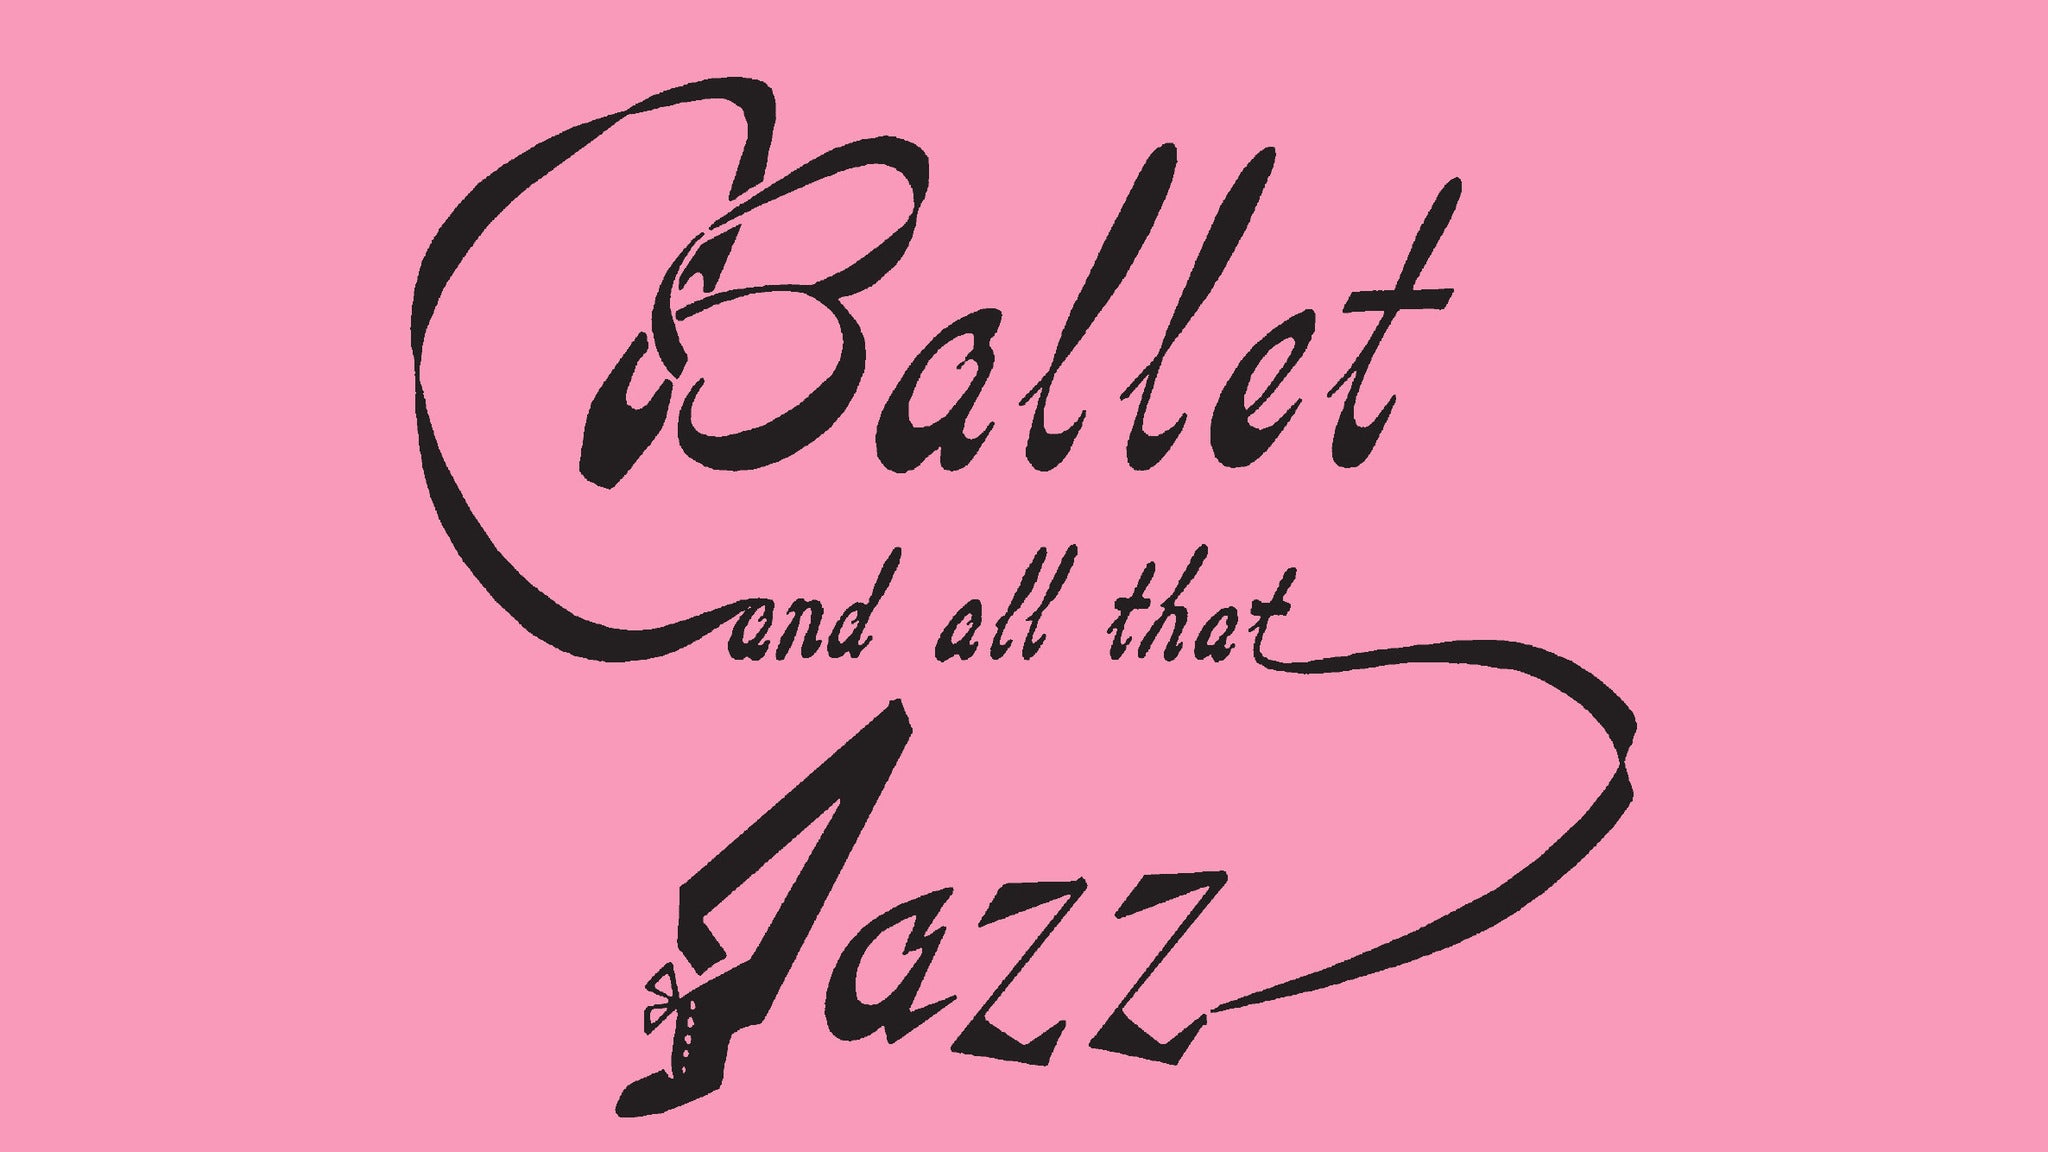 10 AM Spring Recital Presented by Ballet & All That Jazz